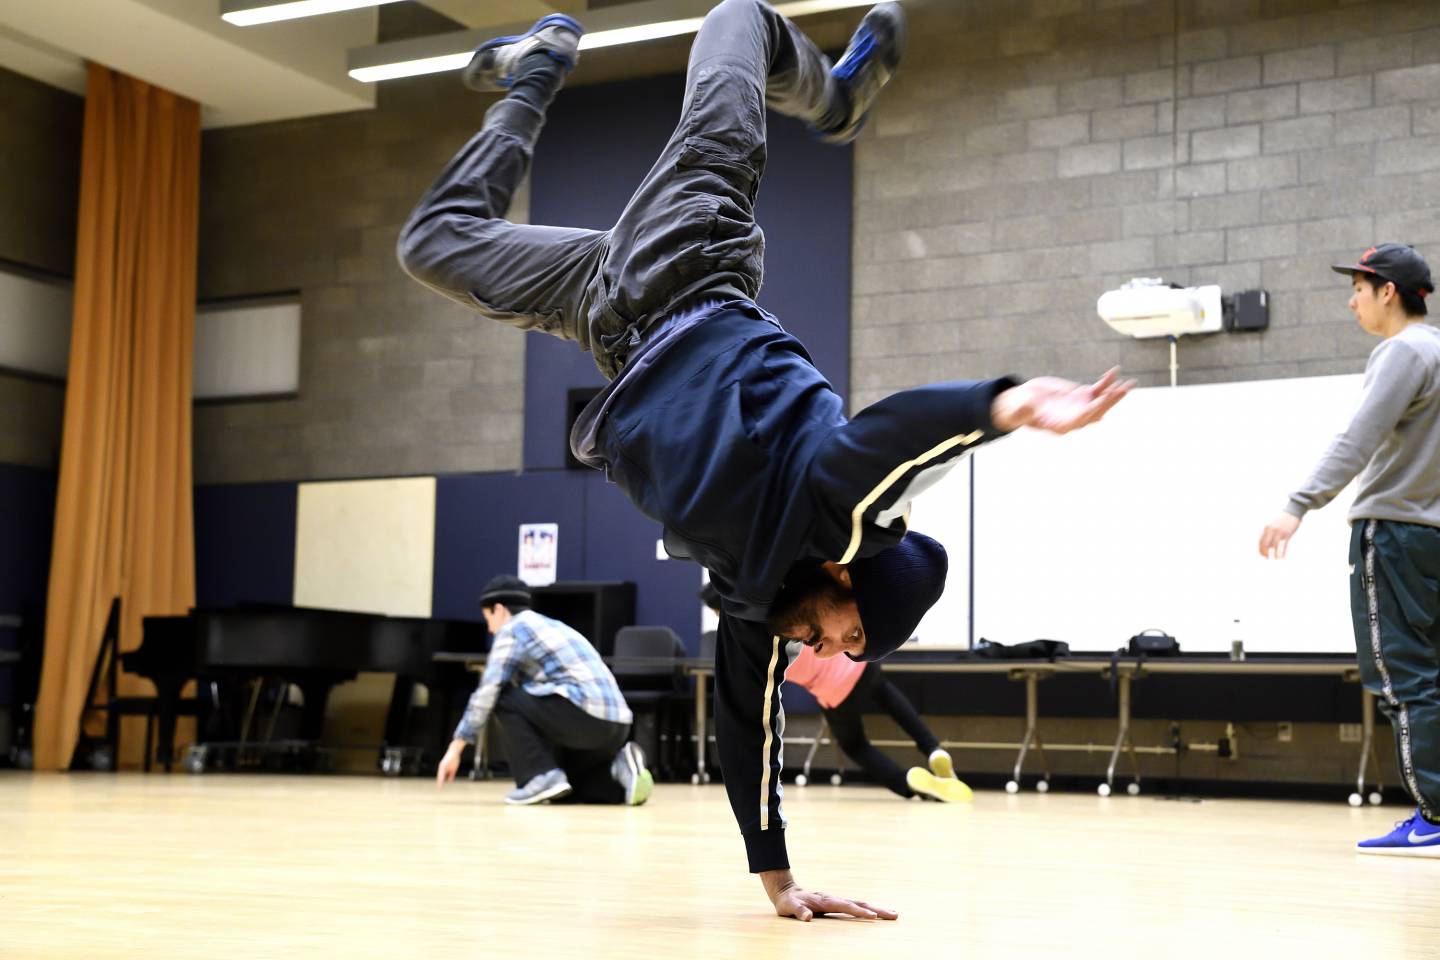 A breakdancer spins on his shoulders